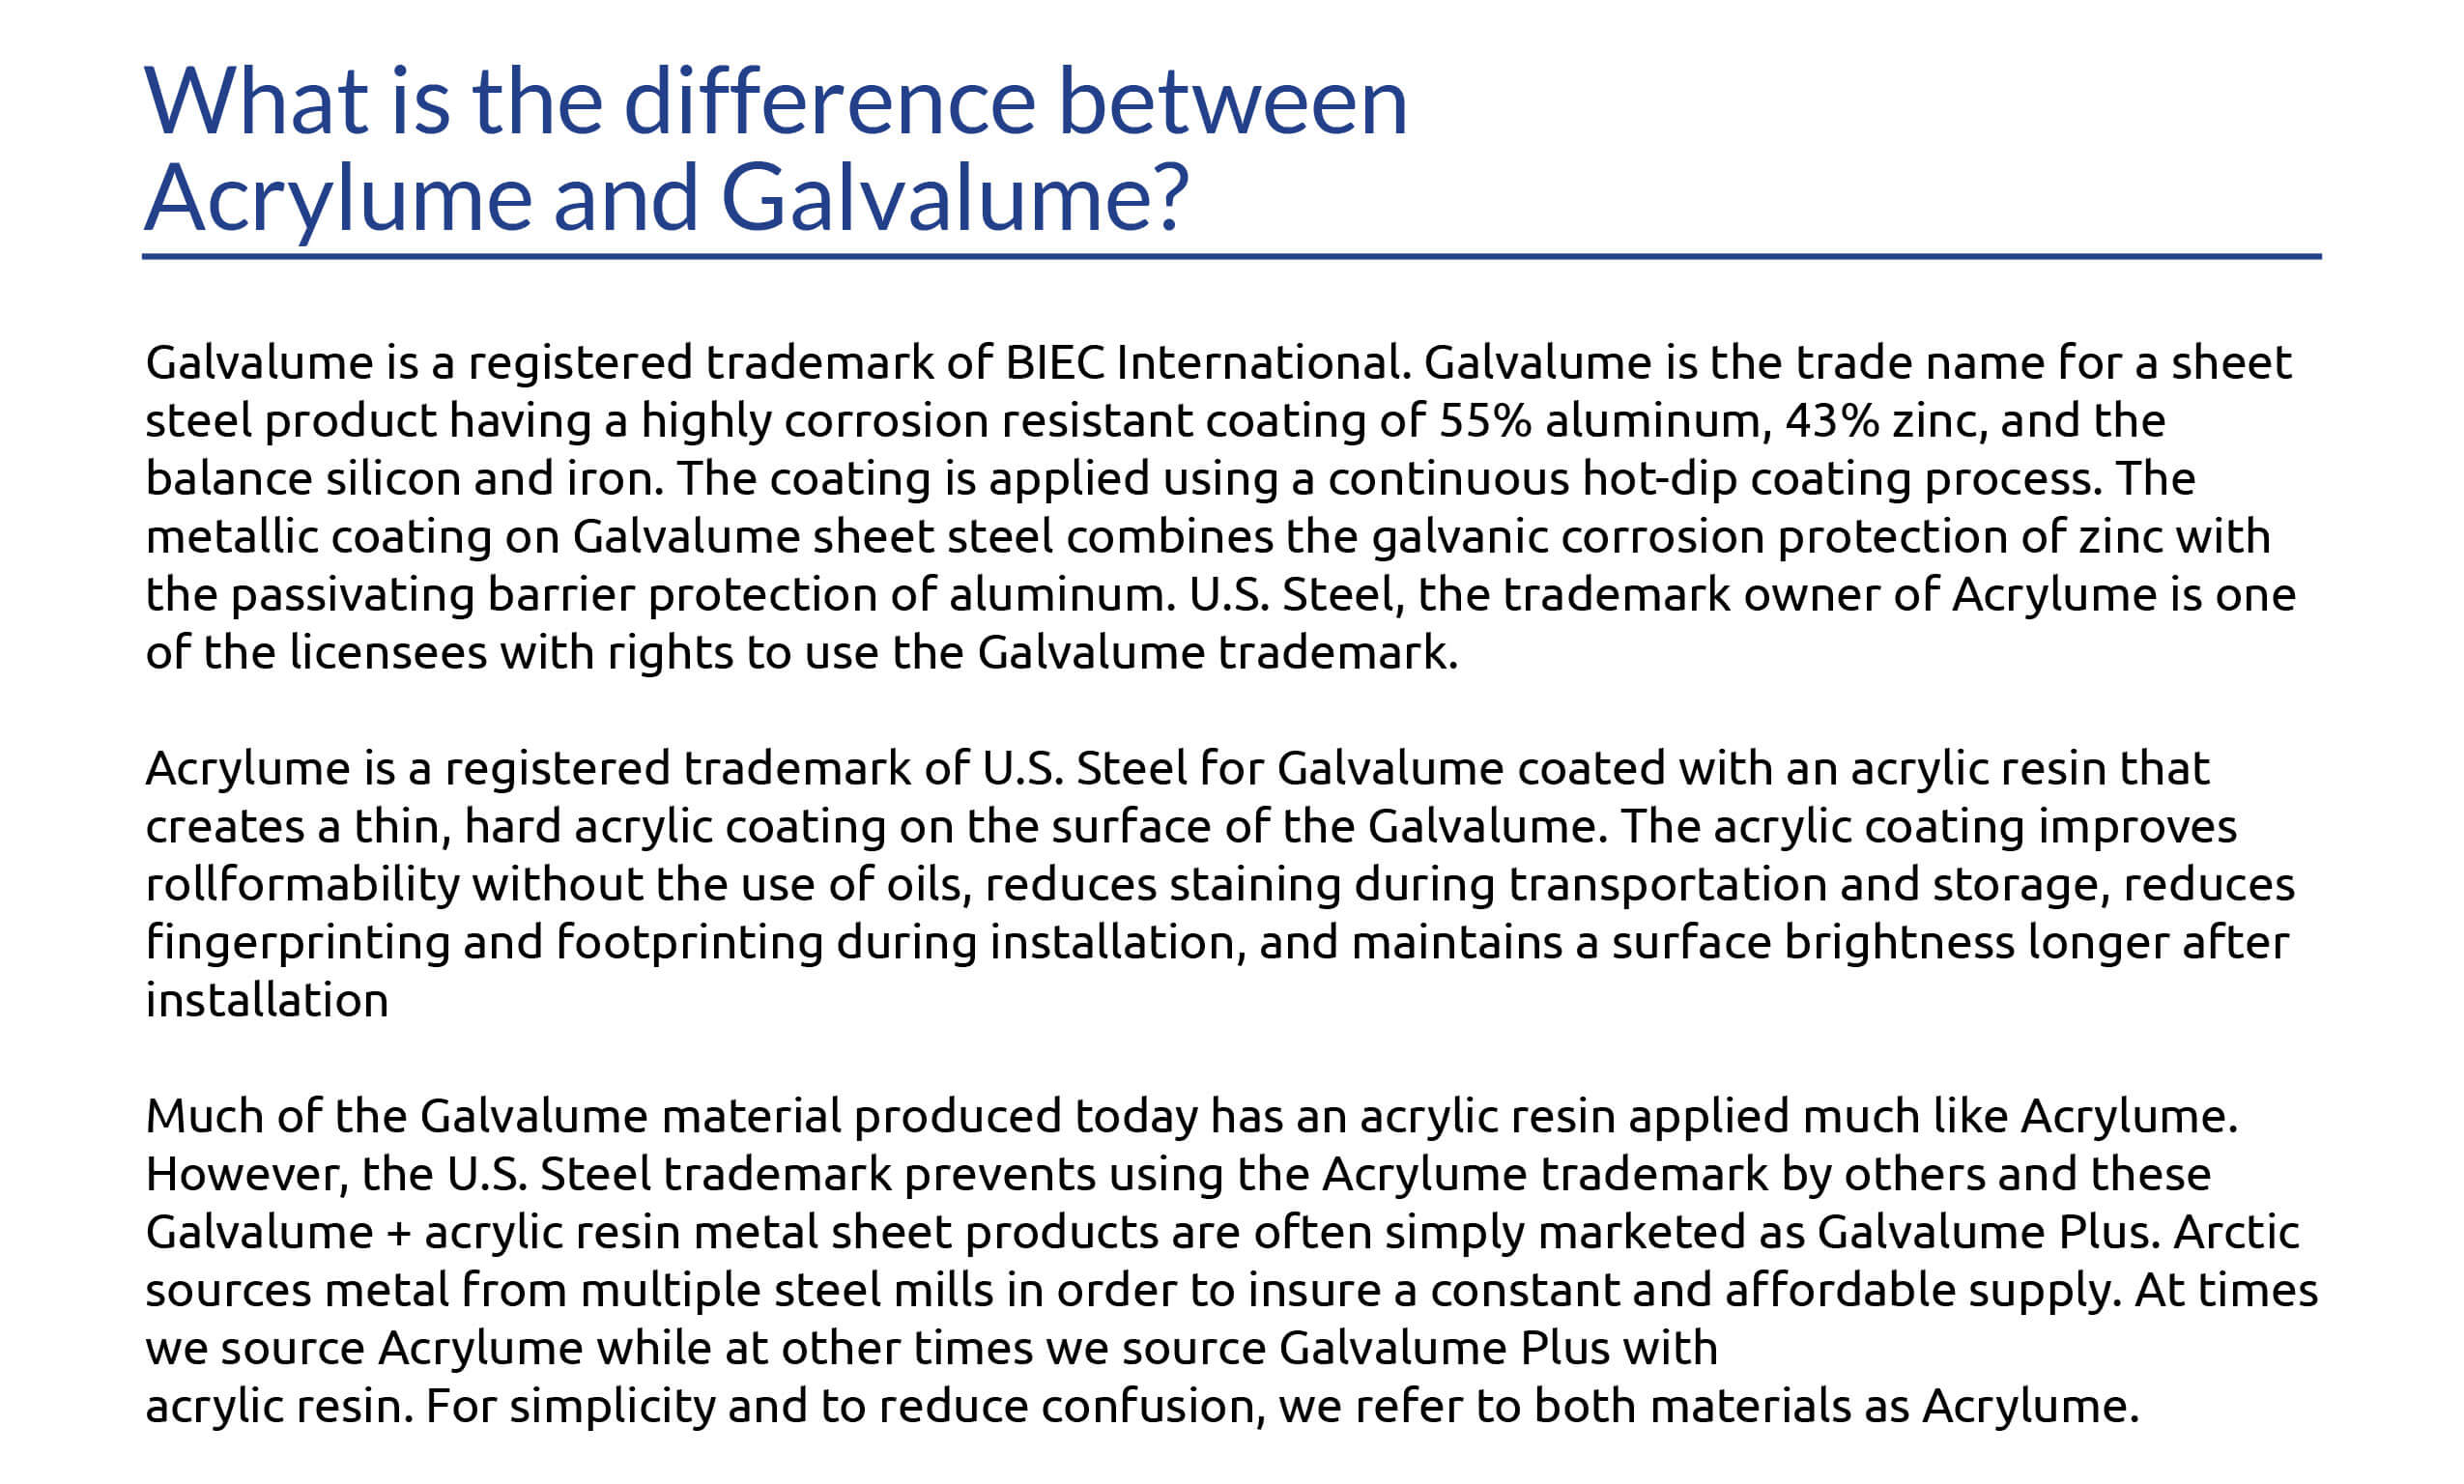 What is the difference between Acrylume and Galvalume